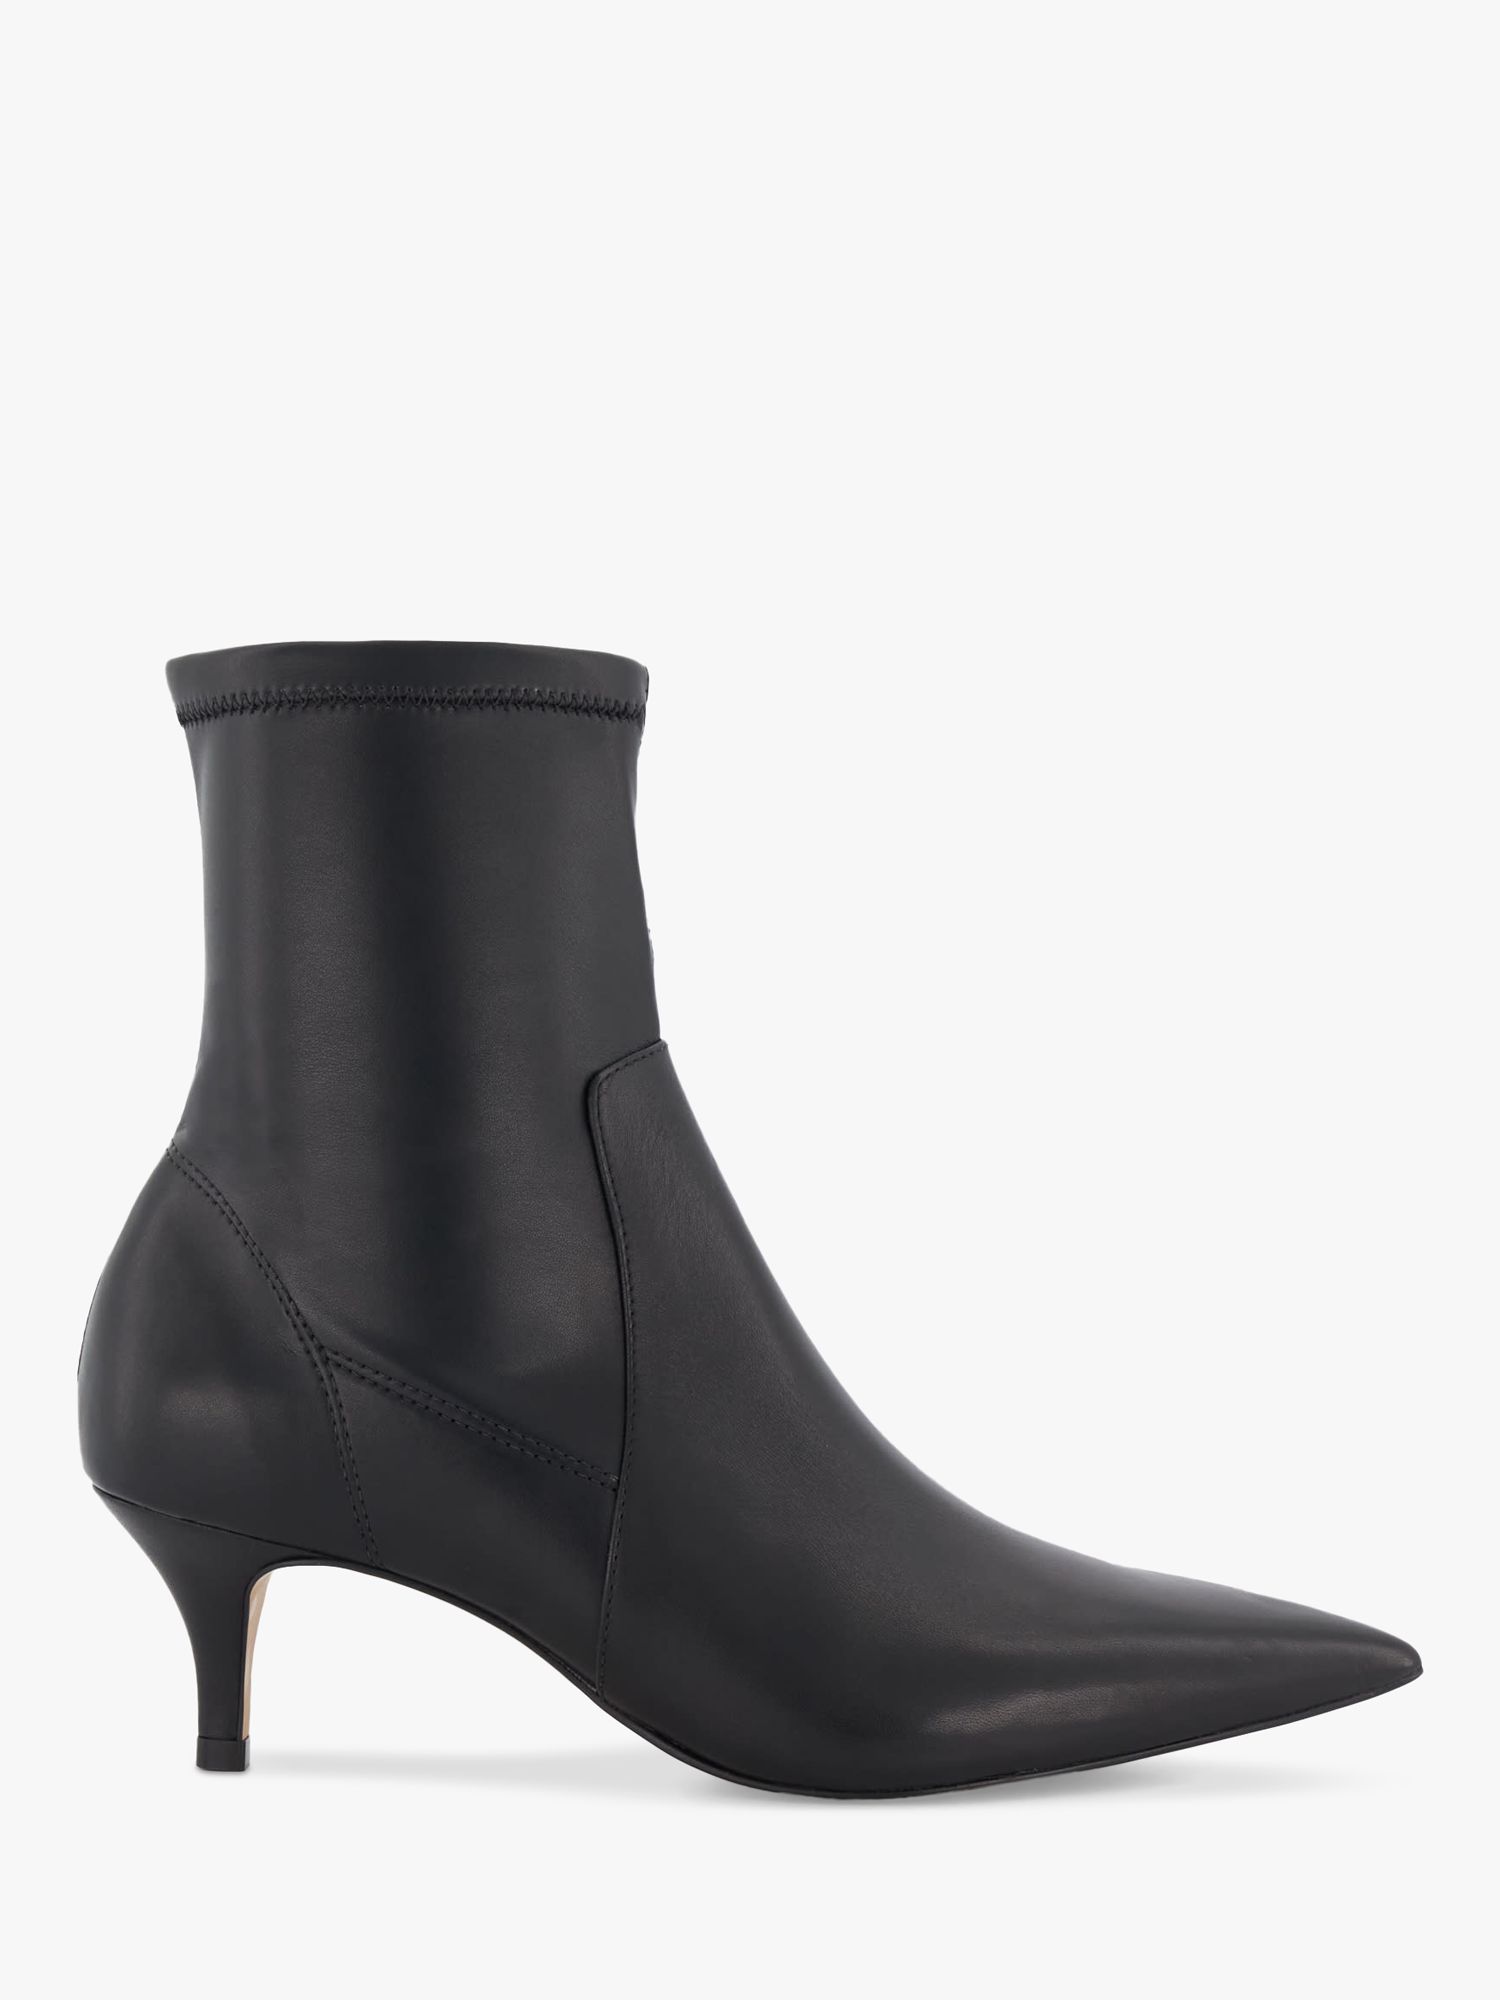 Dune Origami Leather Stretch Ankle Boots, Black at John Lewis & Partners